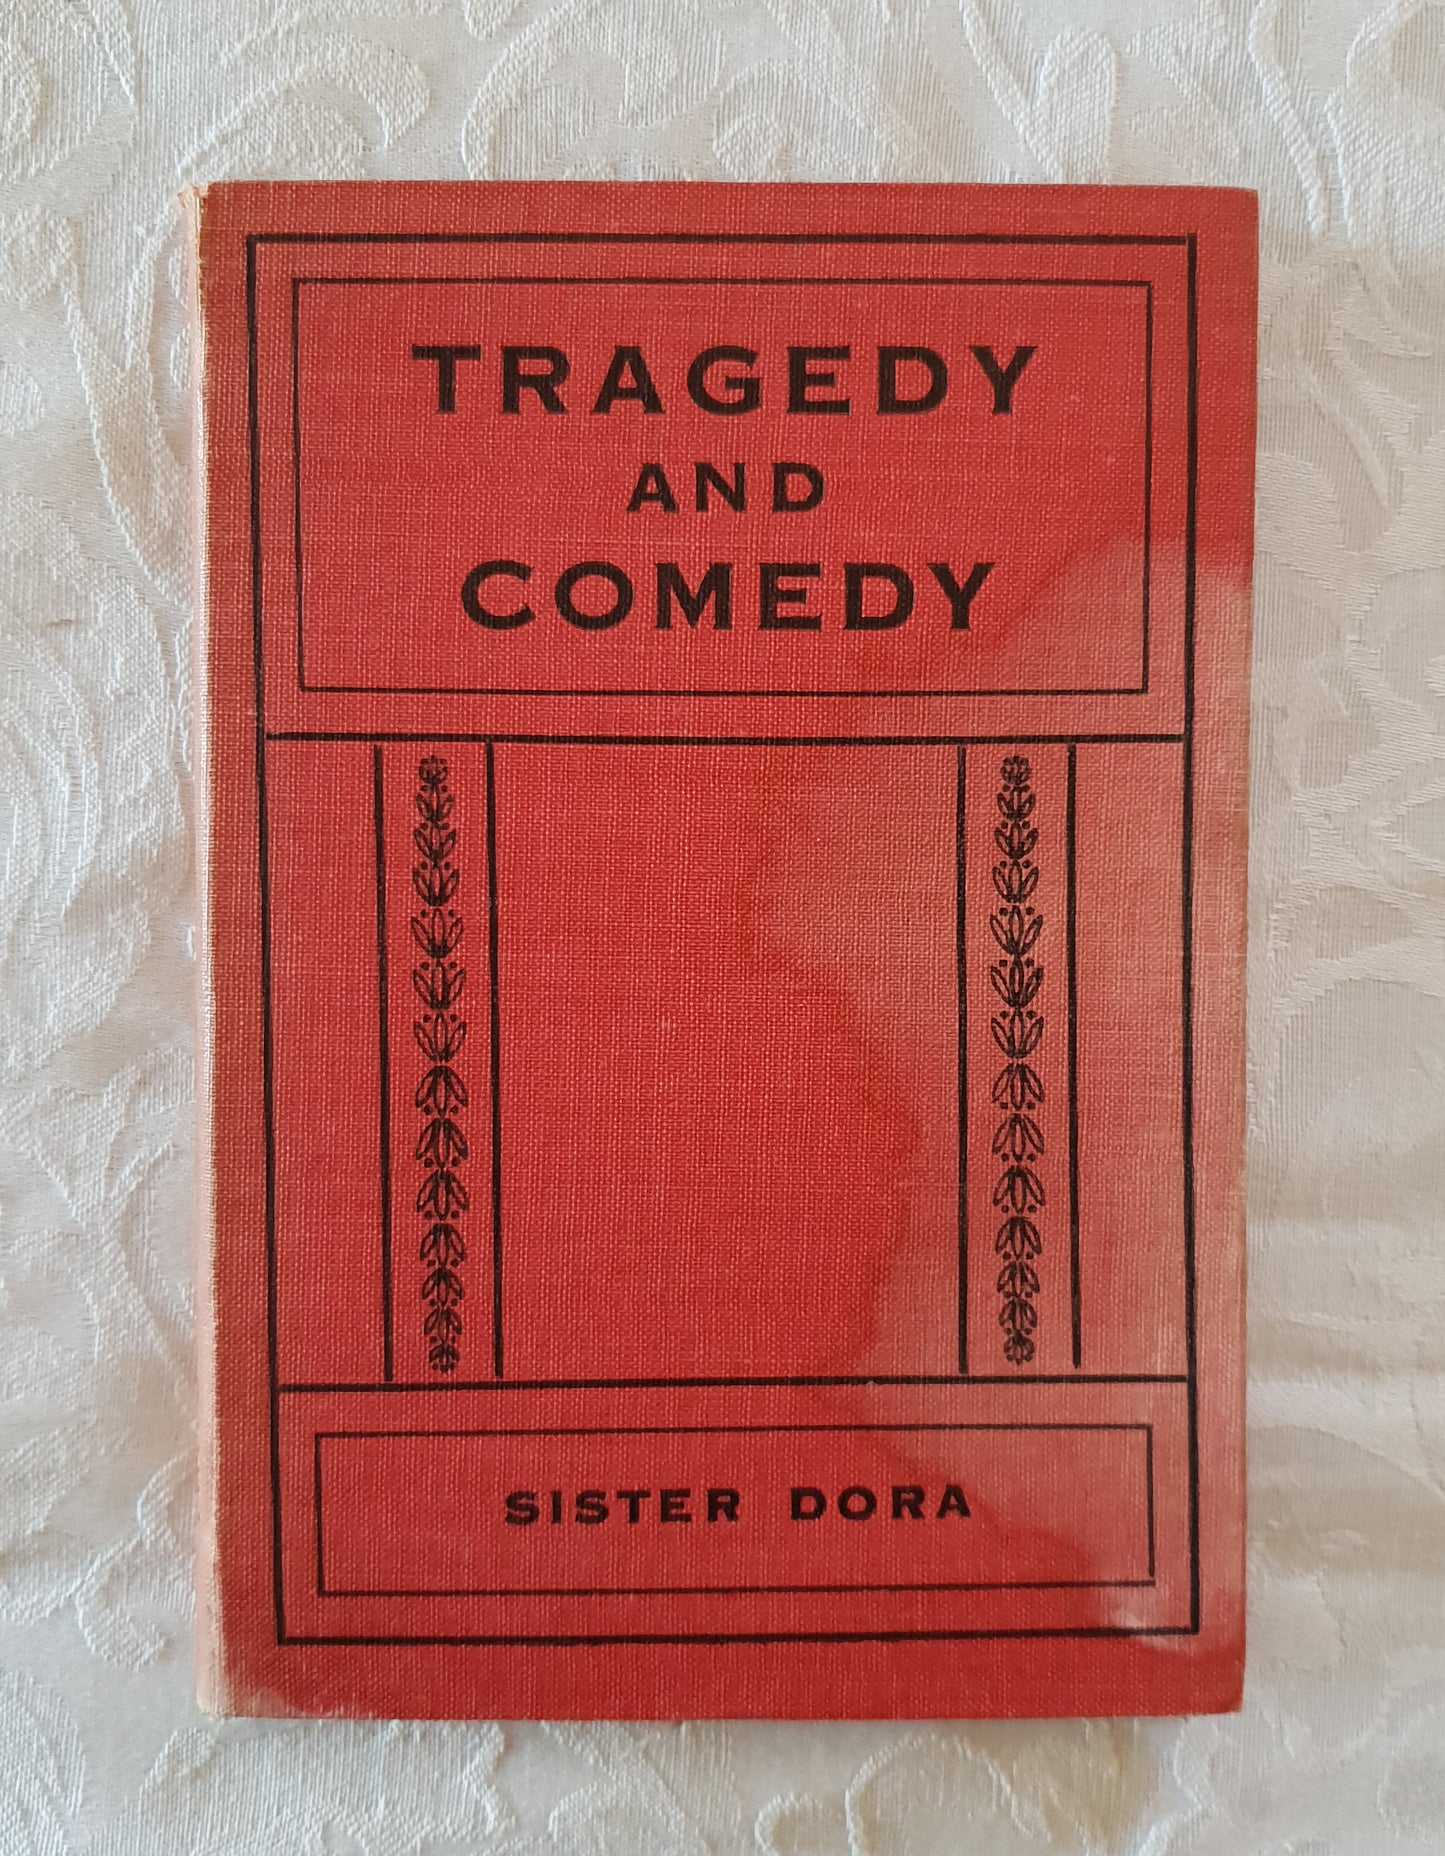 Tragedy and Comedy by Sister Dora